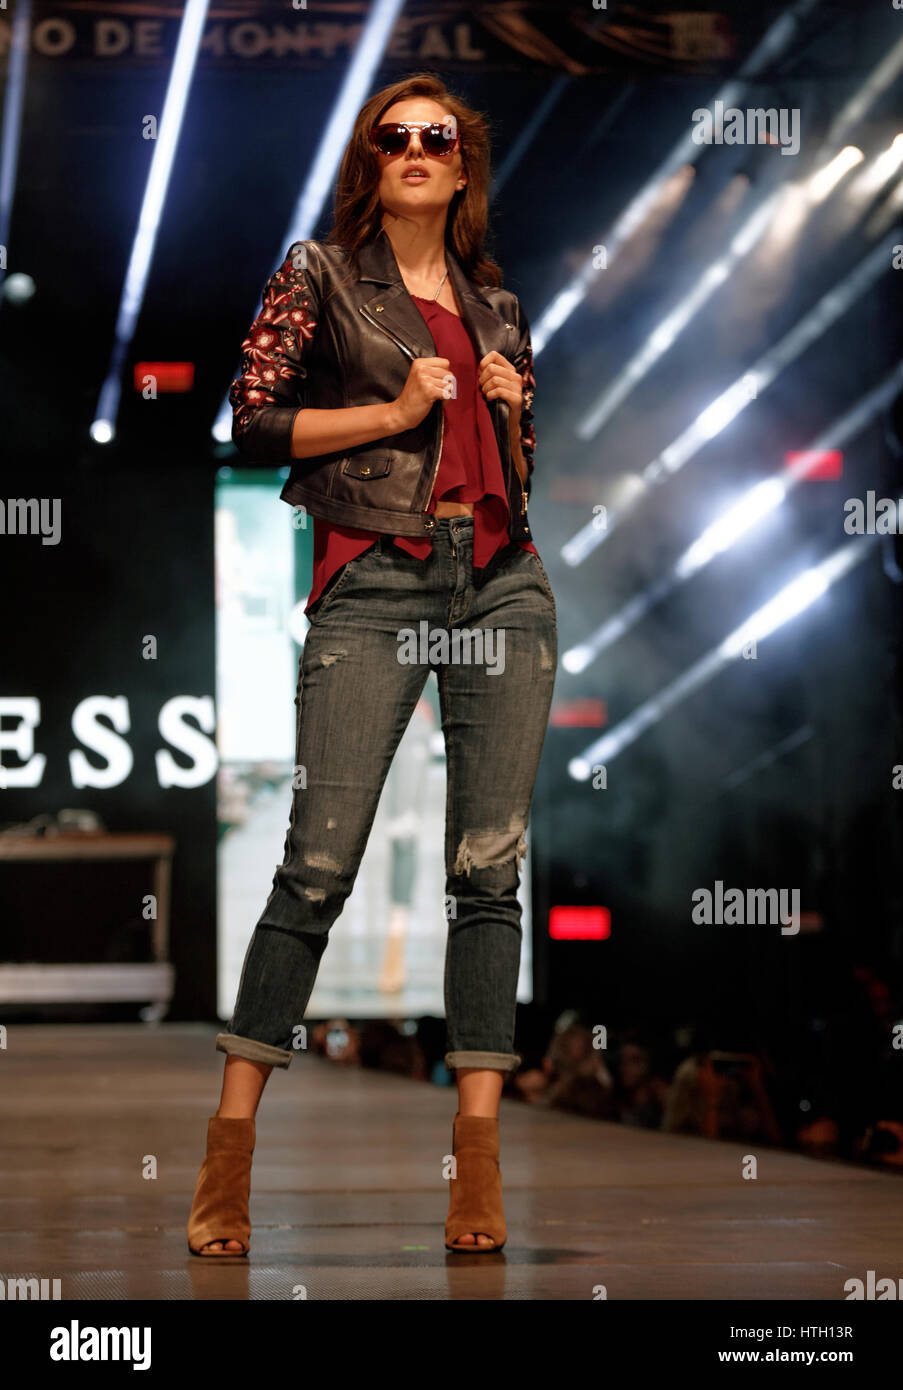 A model poses on the runway at the Guess fashion show held during the Stock  Photo - Alamy